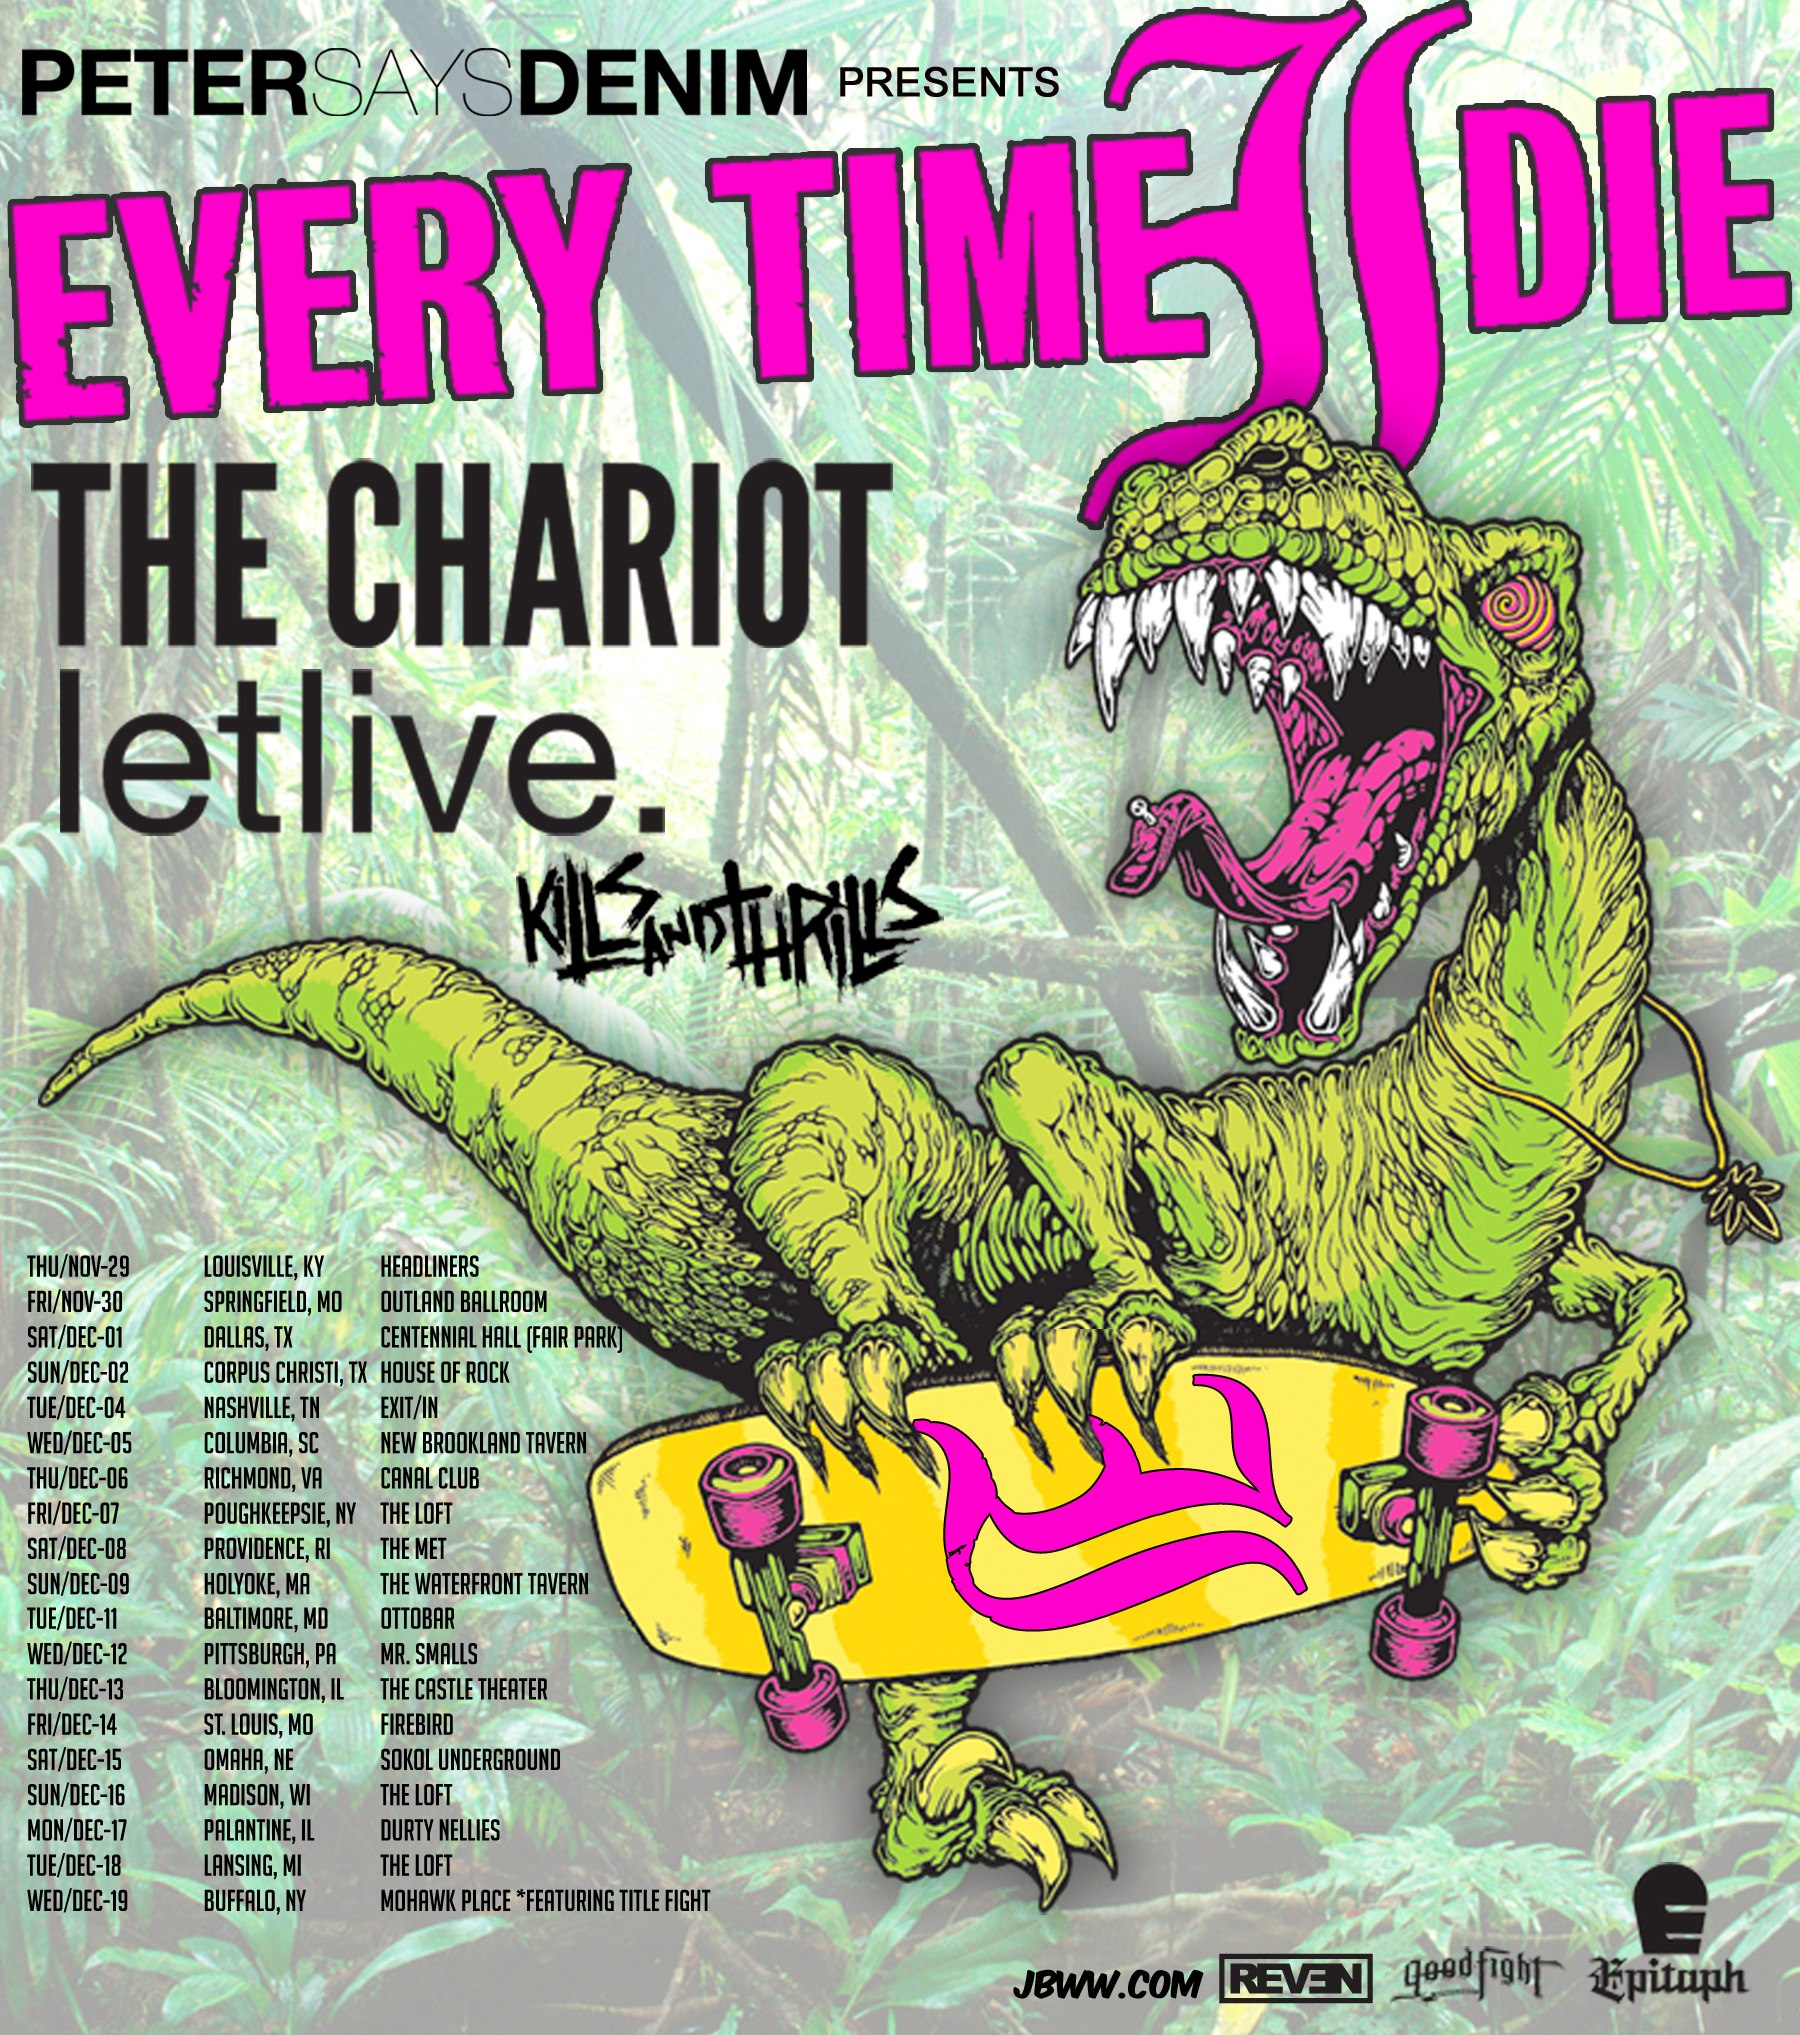 Every Time I Die